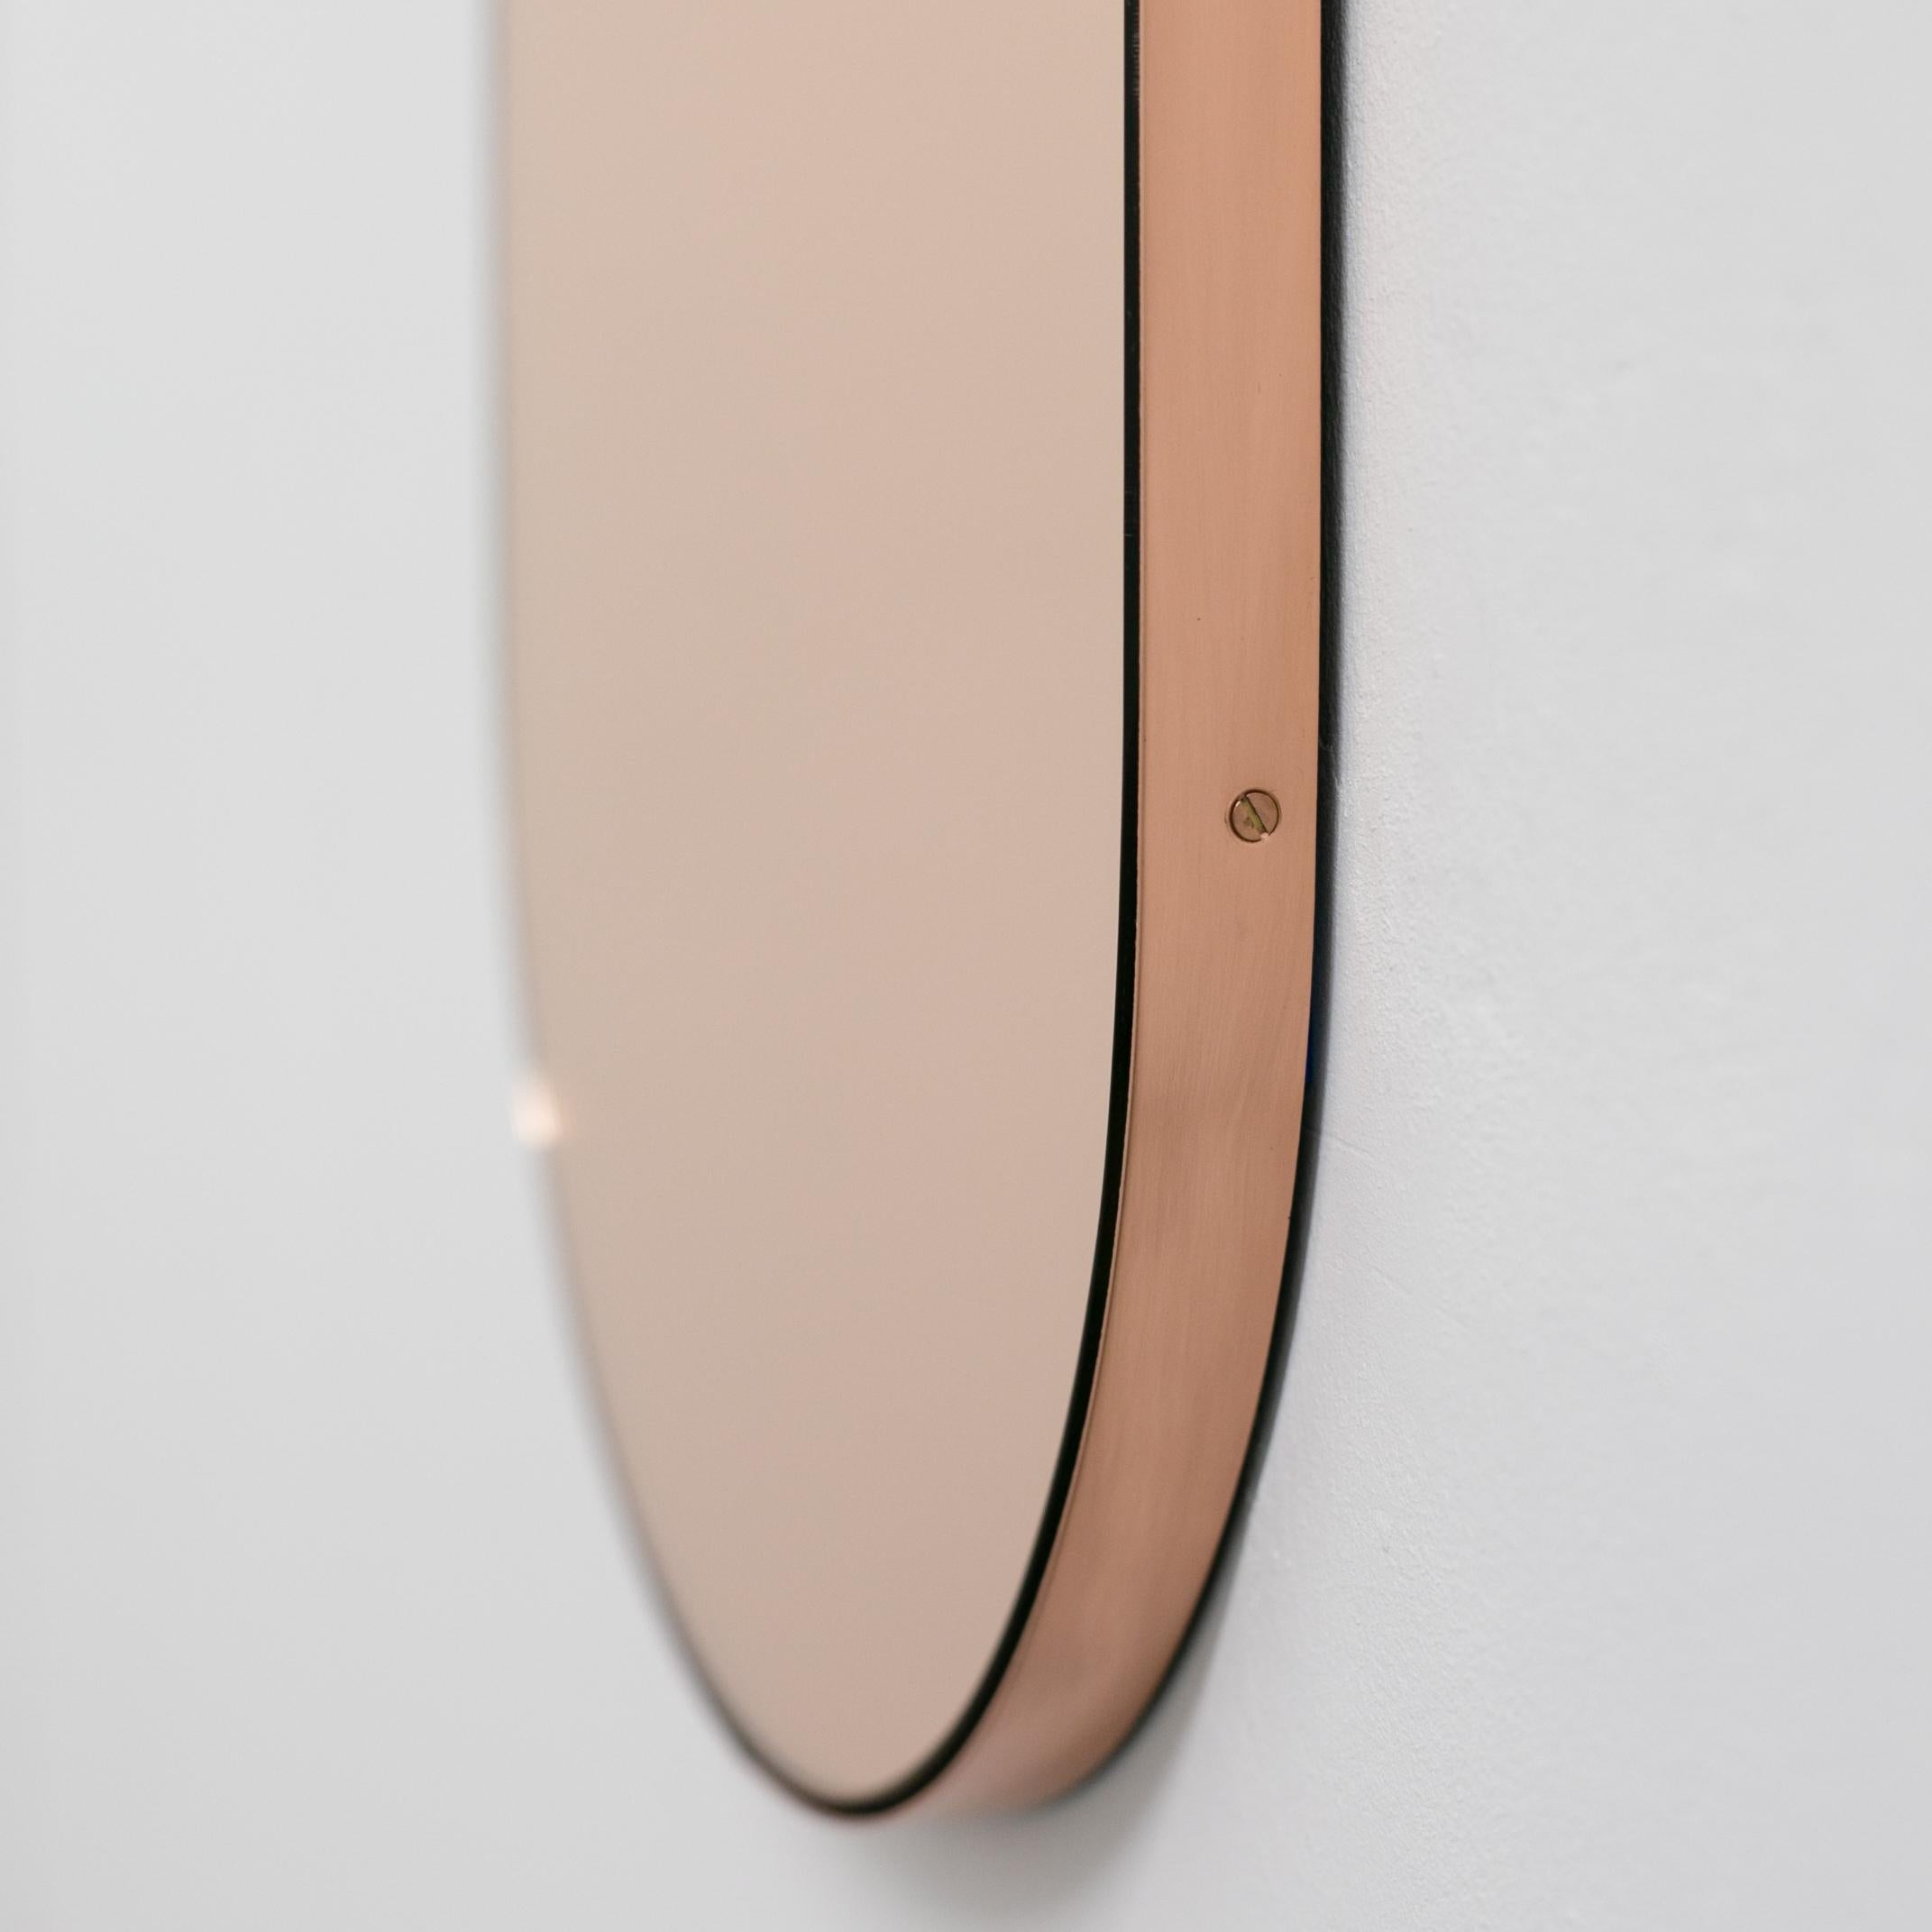 Contemporary Capsula Capsule Shaped Rose Gold Mirror with Copper Frame, Medium For Sale